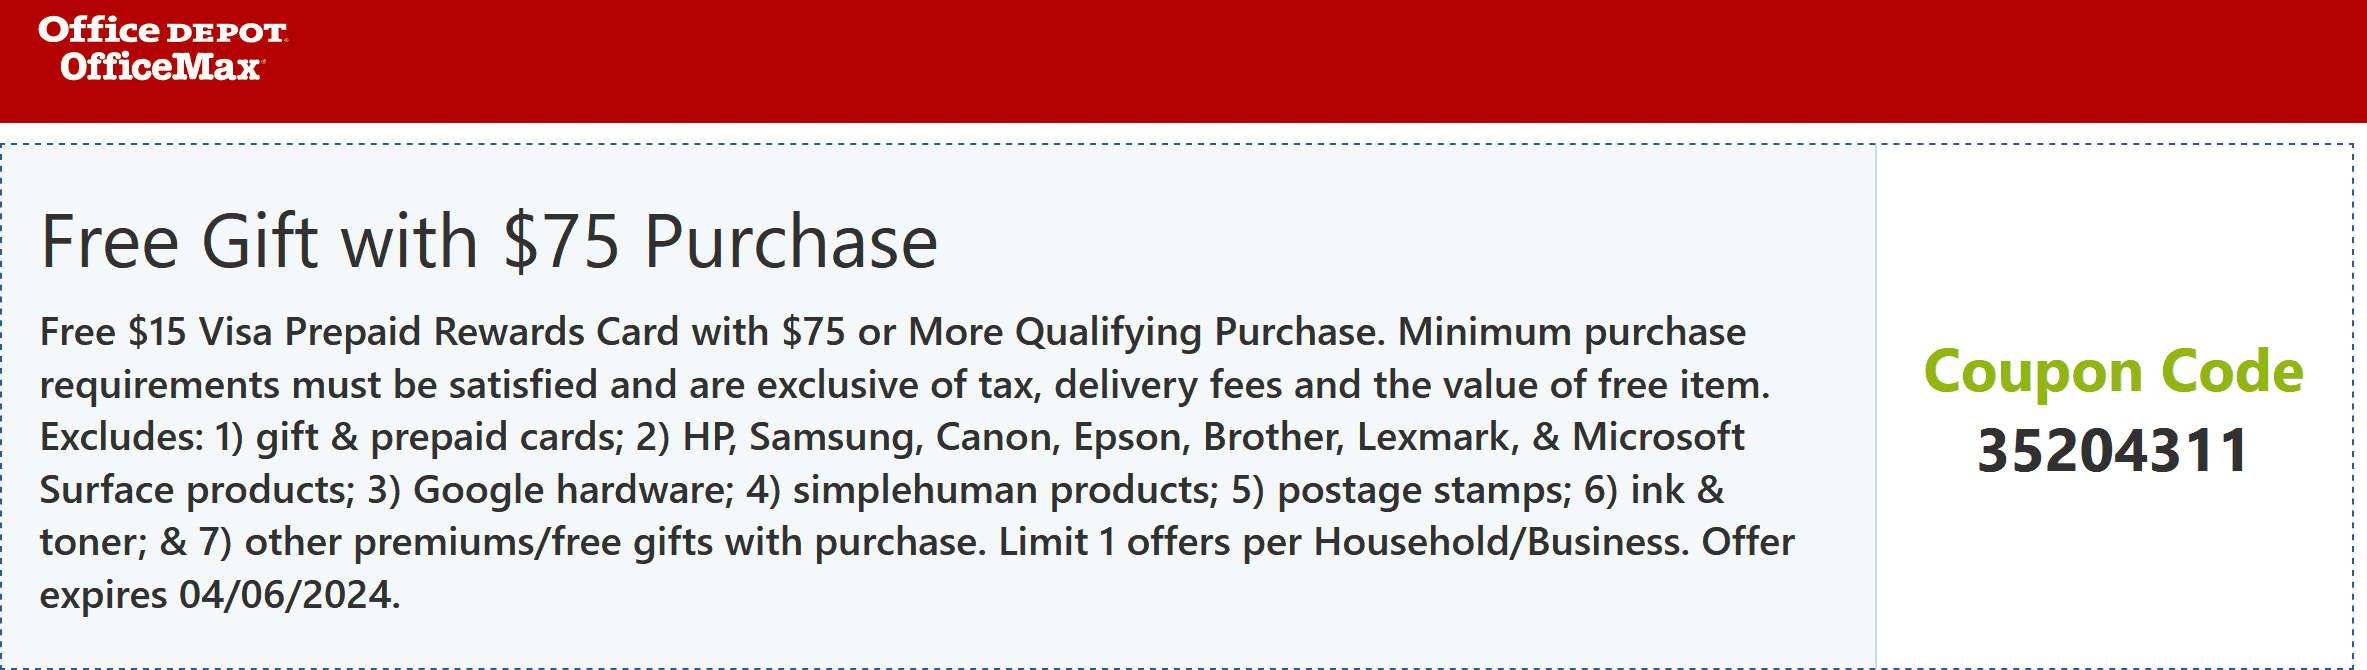 Office Depot stores Coupon  $15 cash card free on $75 at Office Depot OfficeMax via promo code 35204311 #officedepot 